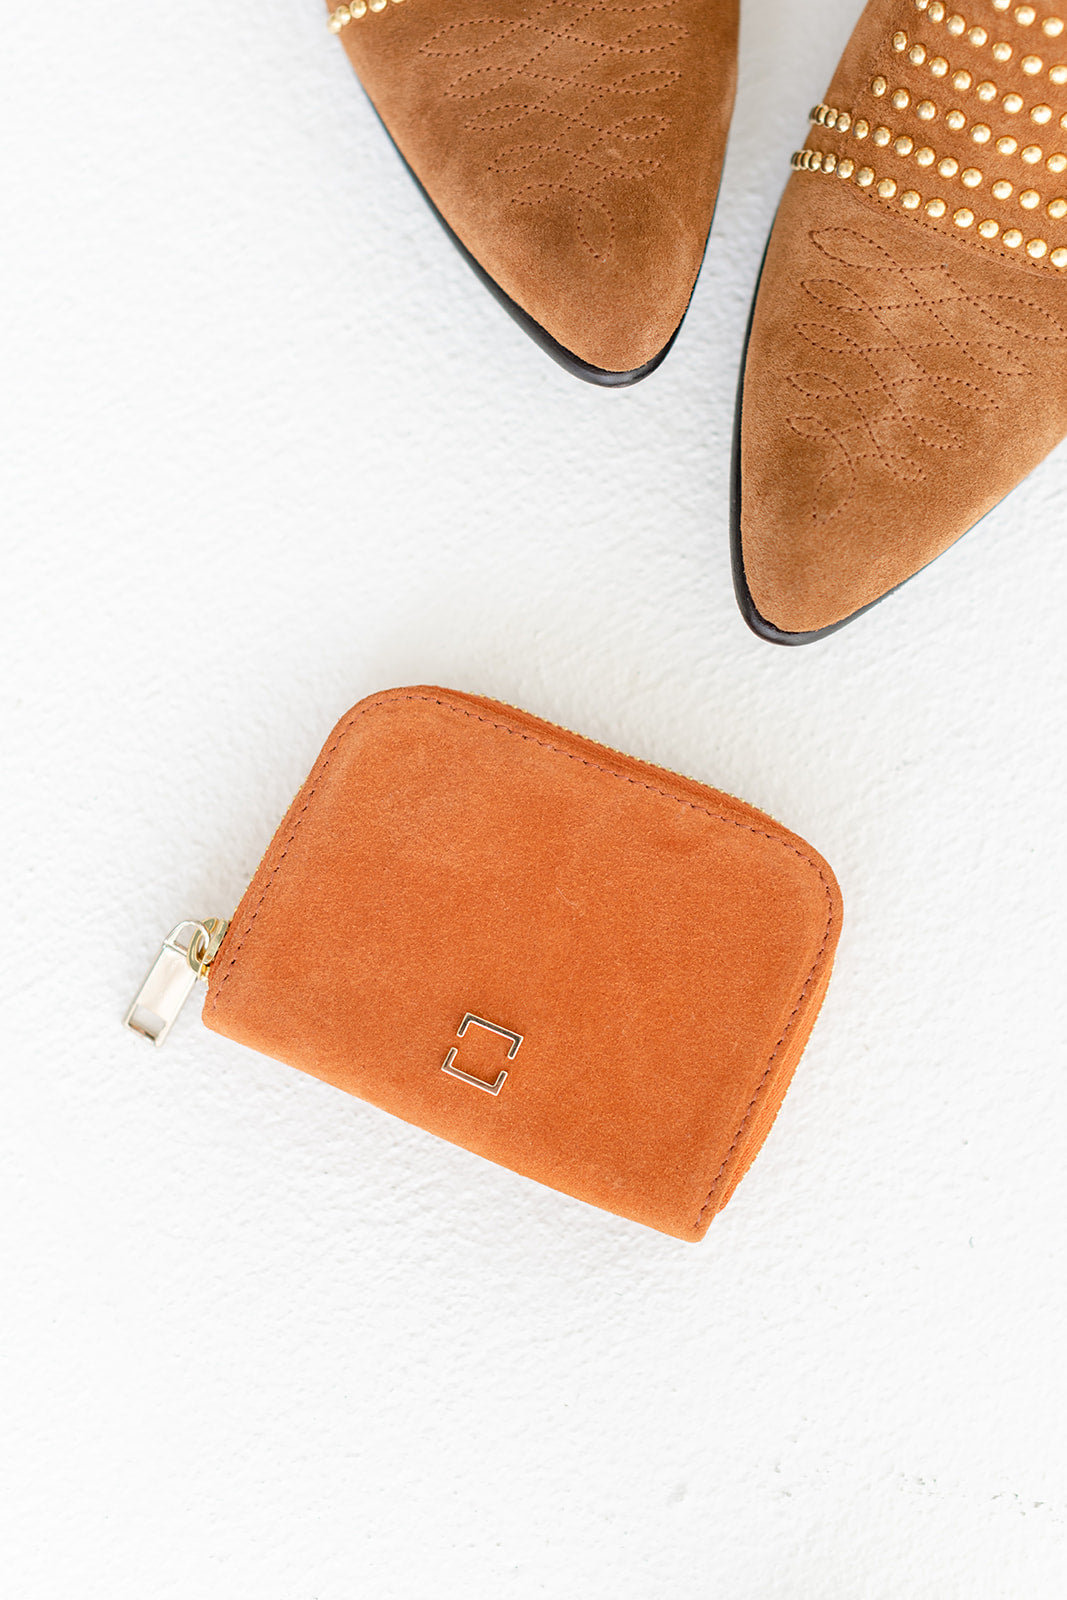 The Coin Clutch